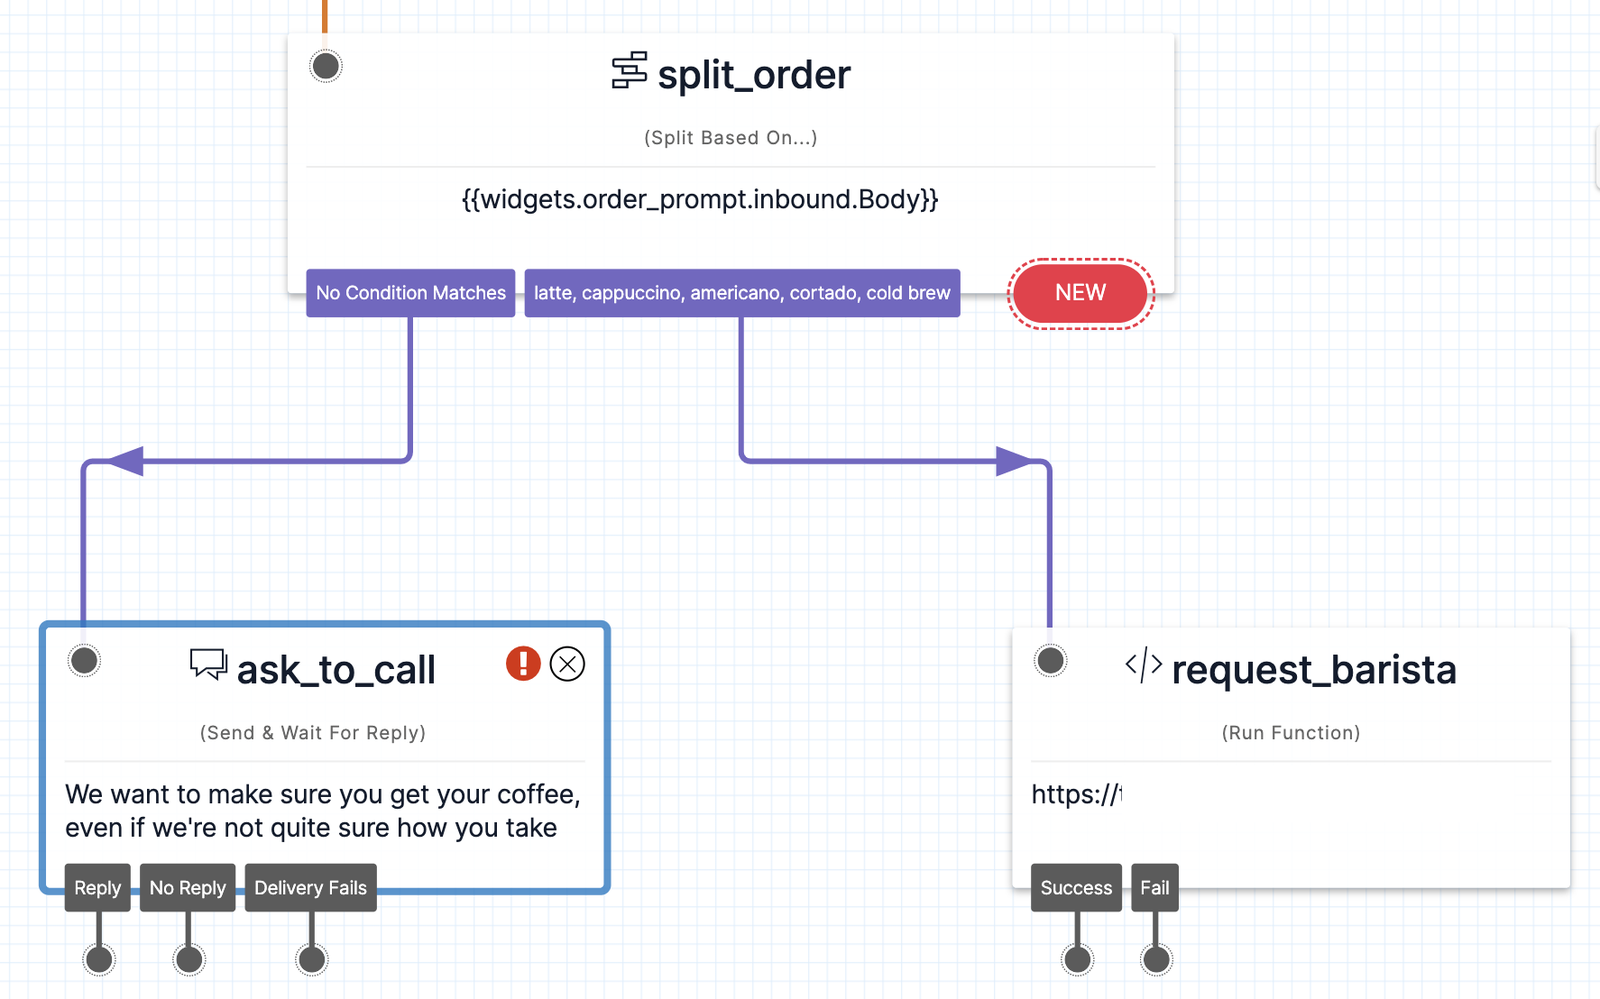 Twilio Studio Tutorial Baristabot ask_to_call Widget added connected to No Condition Matches condition.